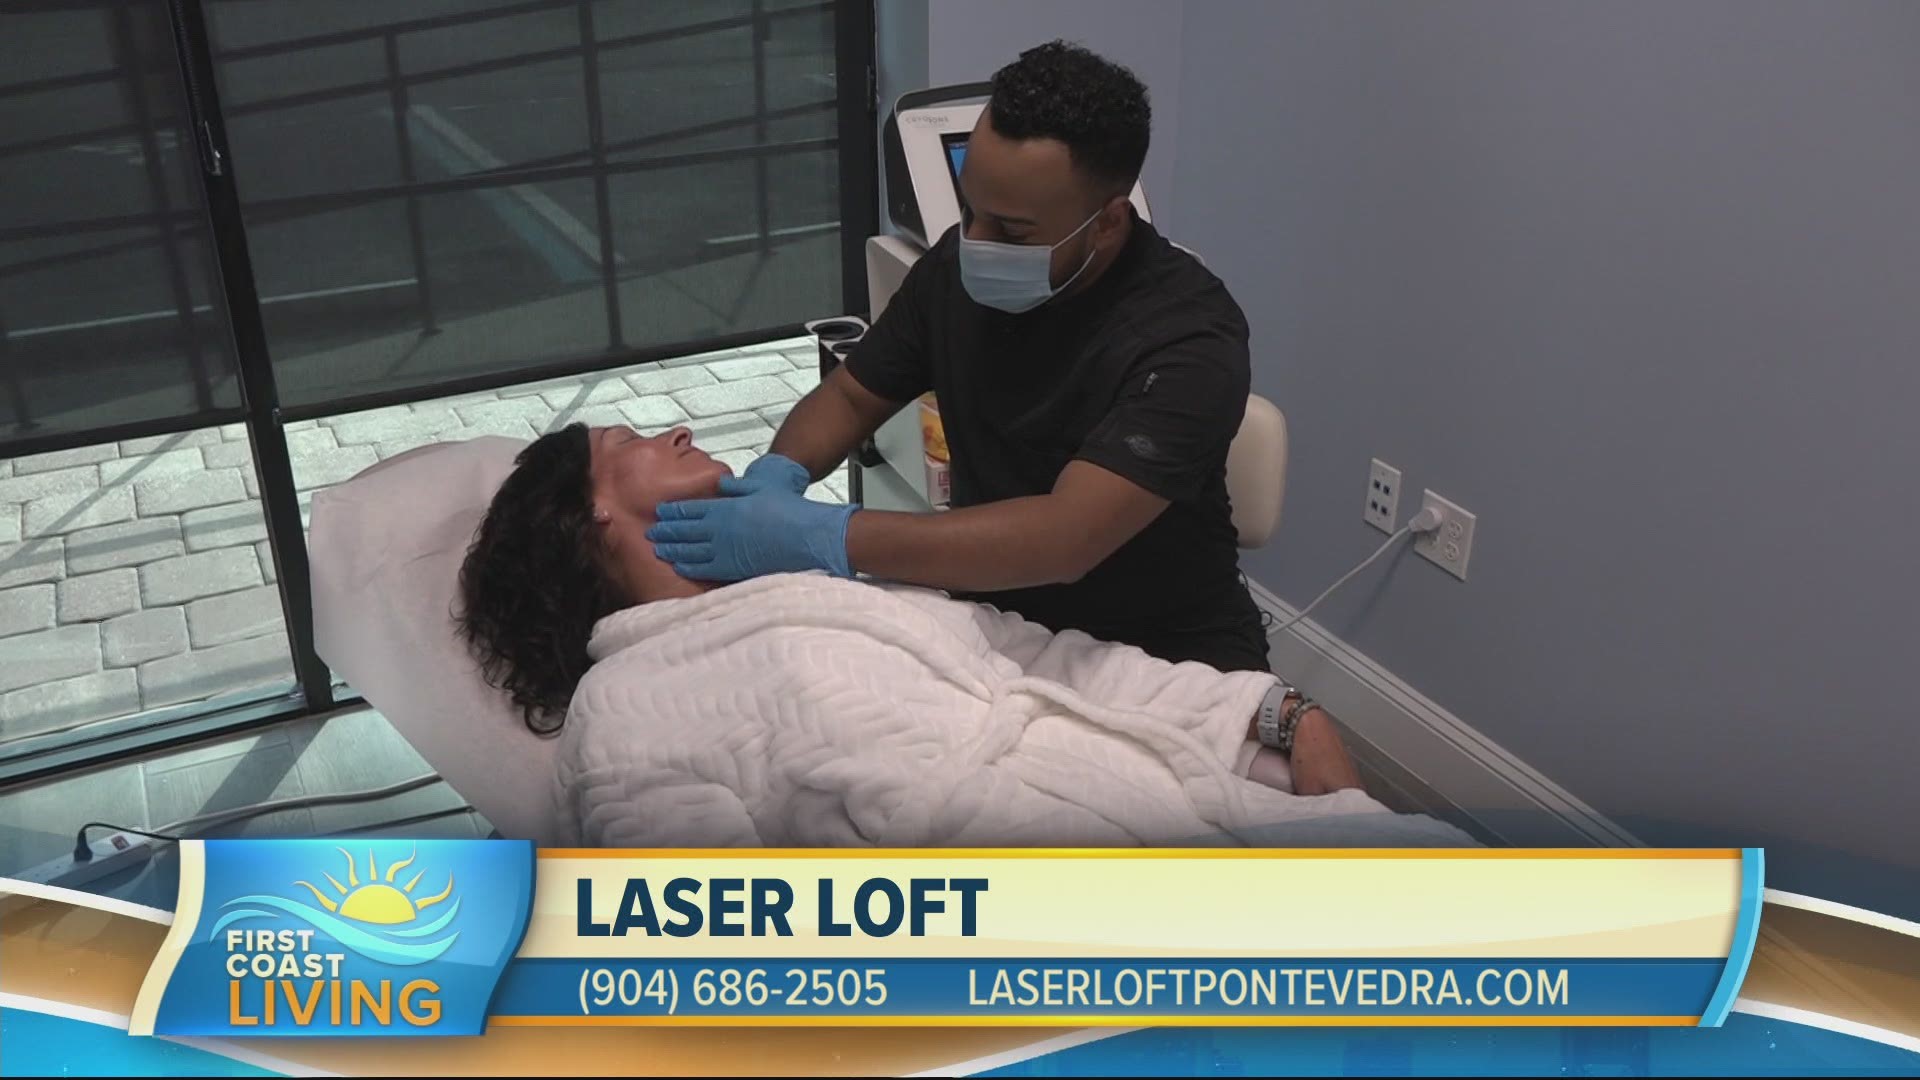 You can help tone those problem areas with effective treatments at Laser Loft!